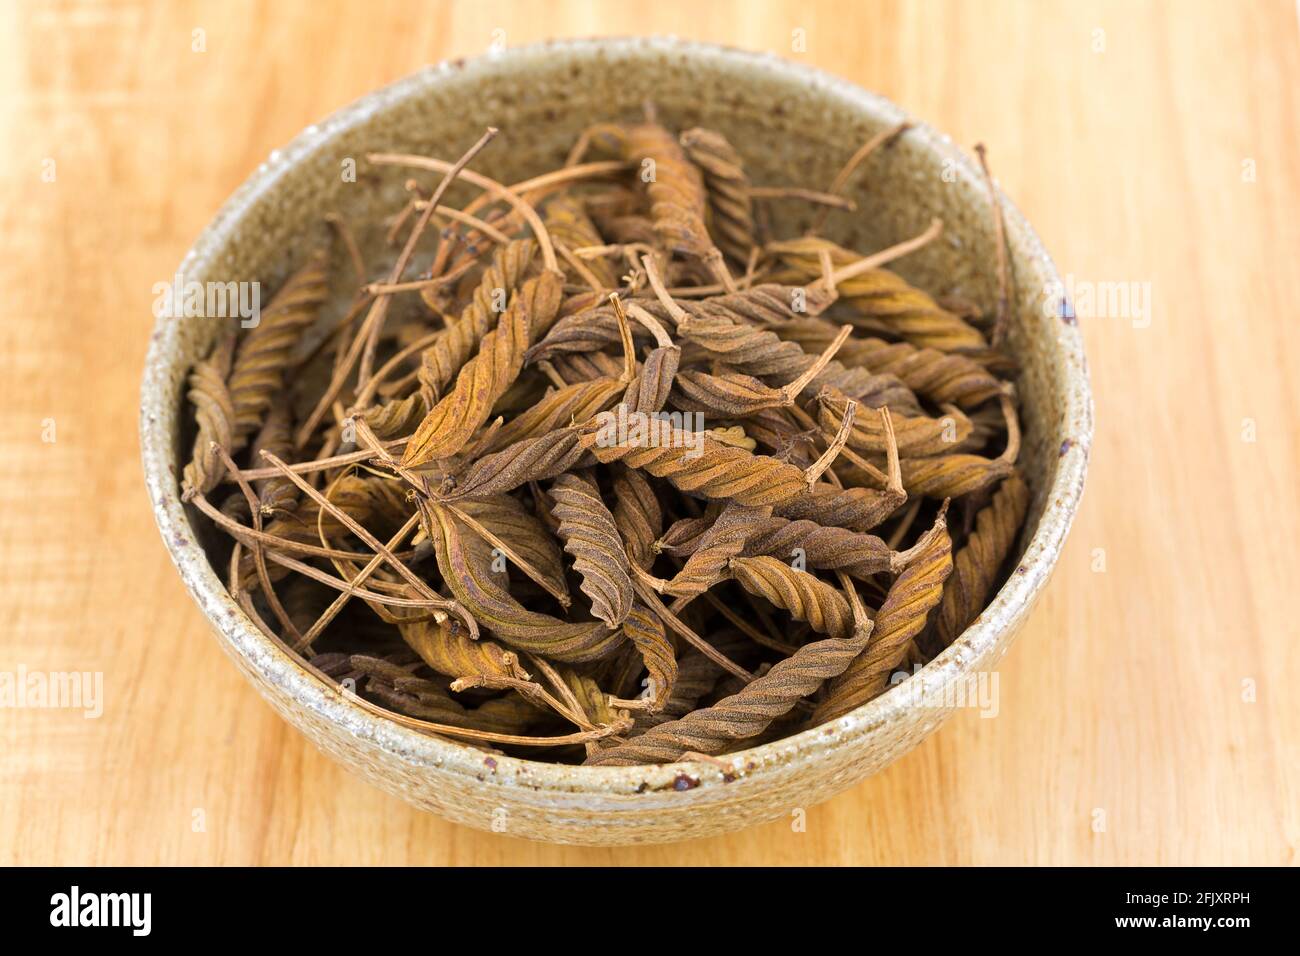 Dried brown fruit of Indian screw tree, compound twisted pod with many medicinal properties, on wooden background (Helicteres isora) Stock Photo